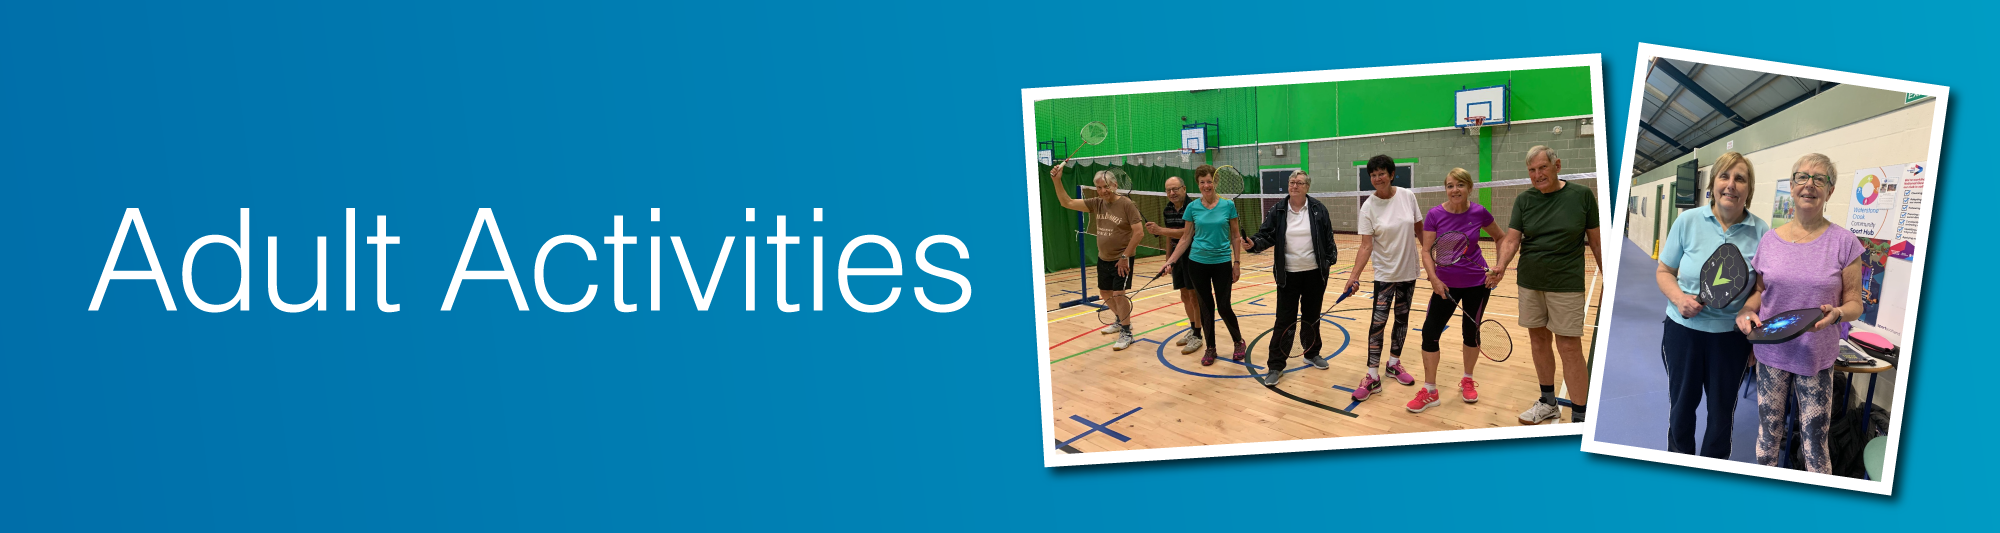 Adult Activities - Fife Sports and Leisure Trust